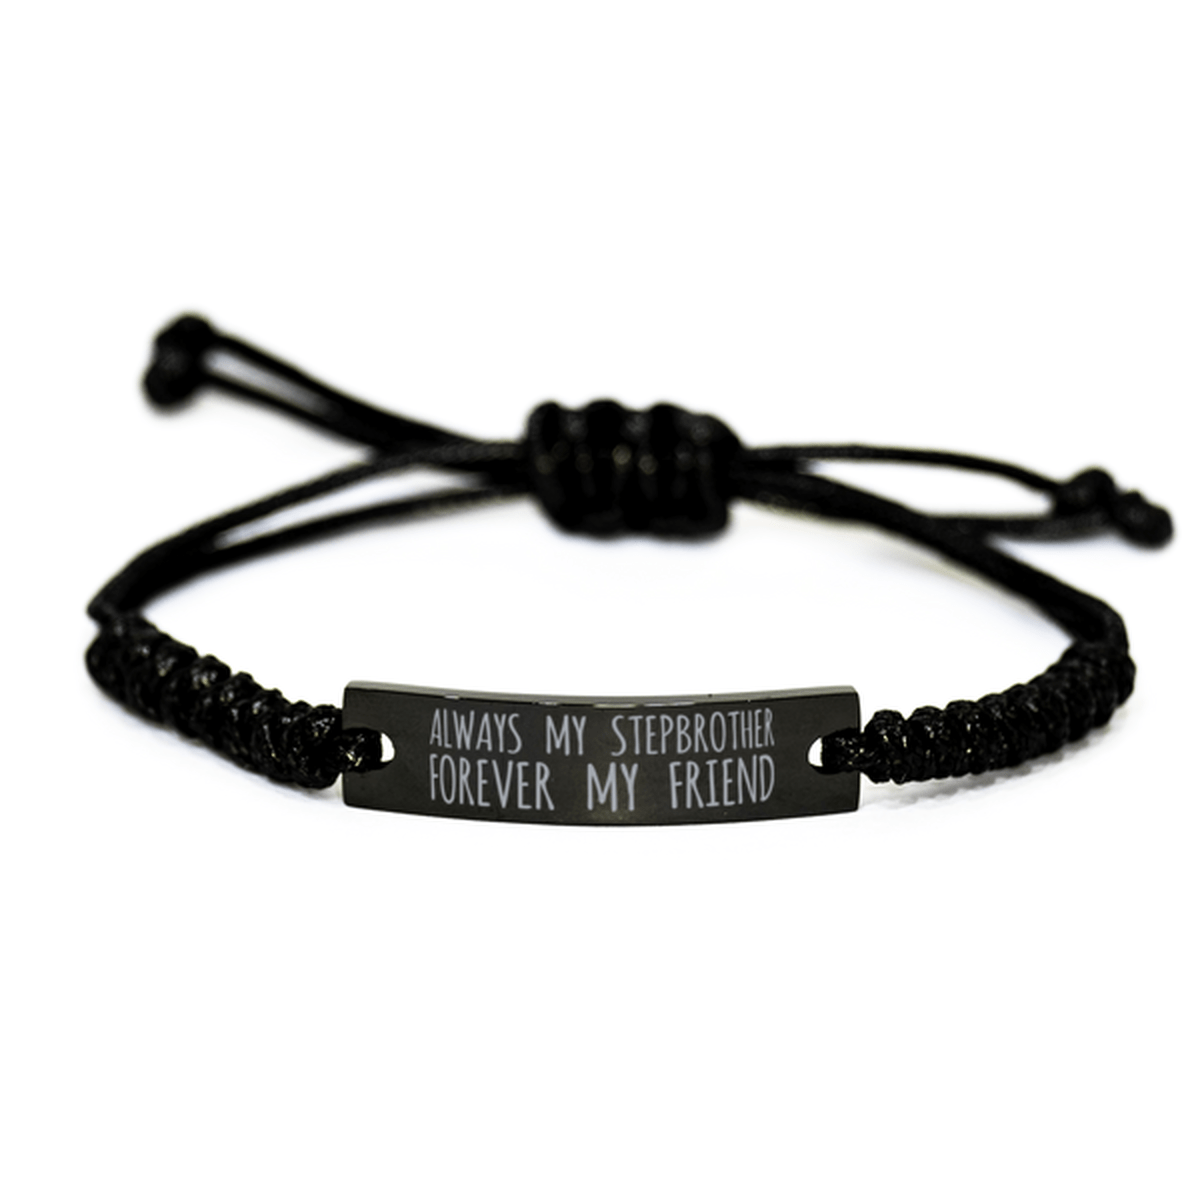 Inspirational Stepbrother Black Rope Bracelet, Always My Stepbrother Forever My Friend, Best Birthday Gifts For Family